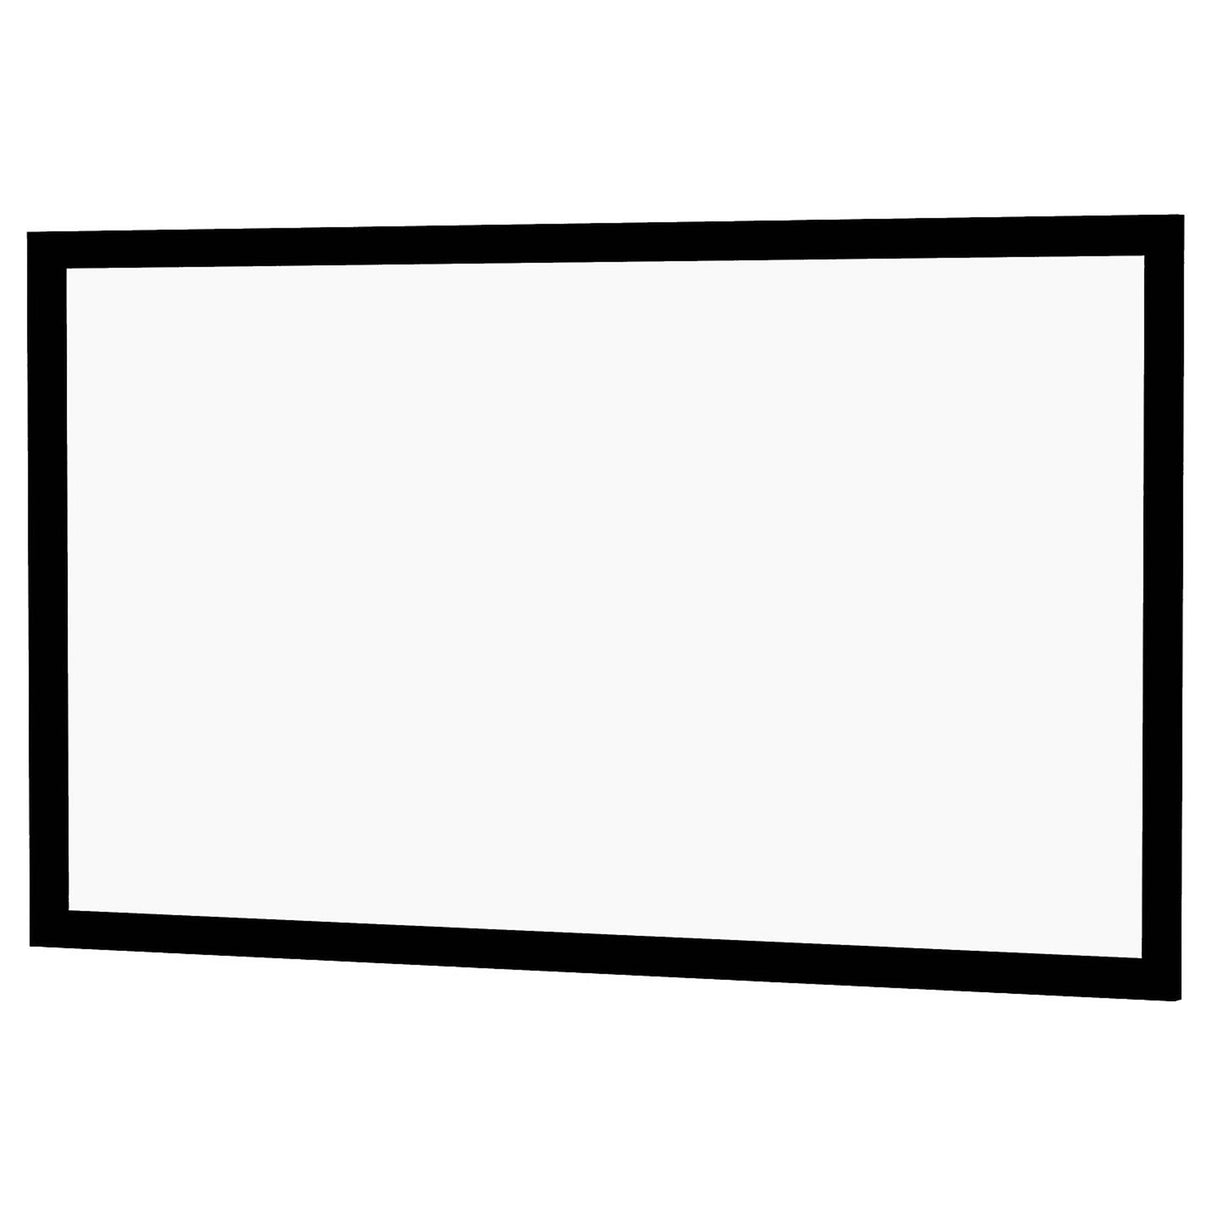 Prime Fixed-frame projector screen with acoustically transparent perforated white fabric (220")